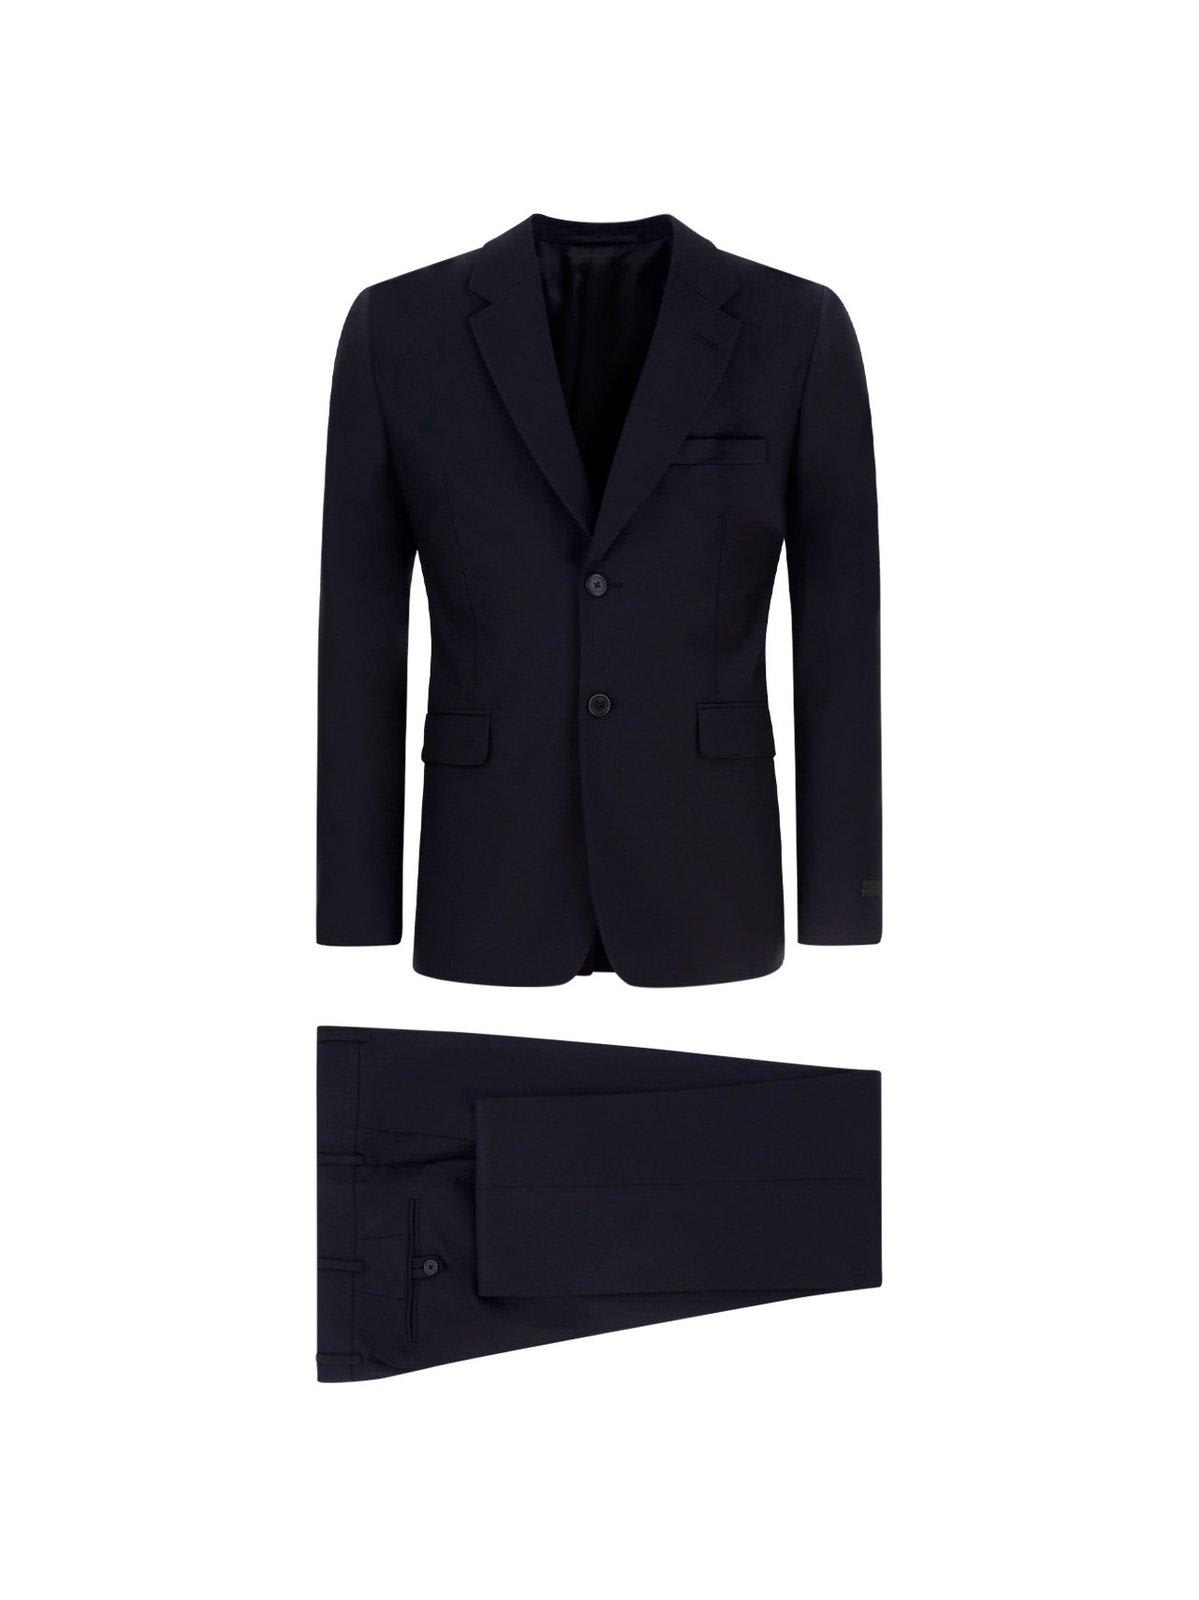 PRADA SINGLE-BREASTED TAILORED TWO-PIECE SUIT